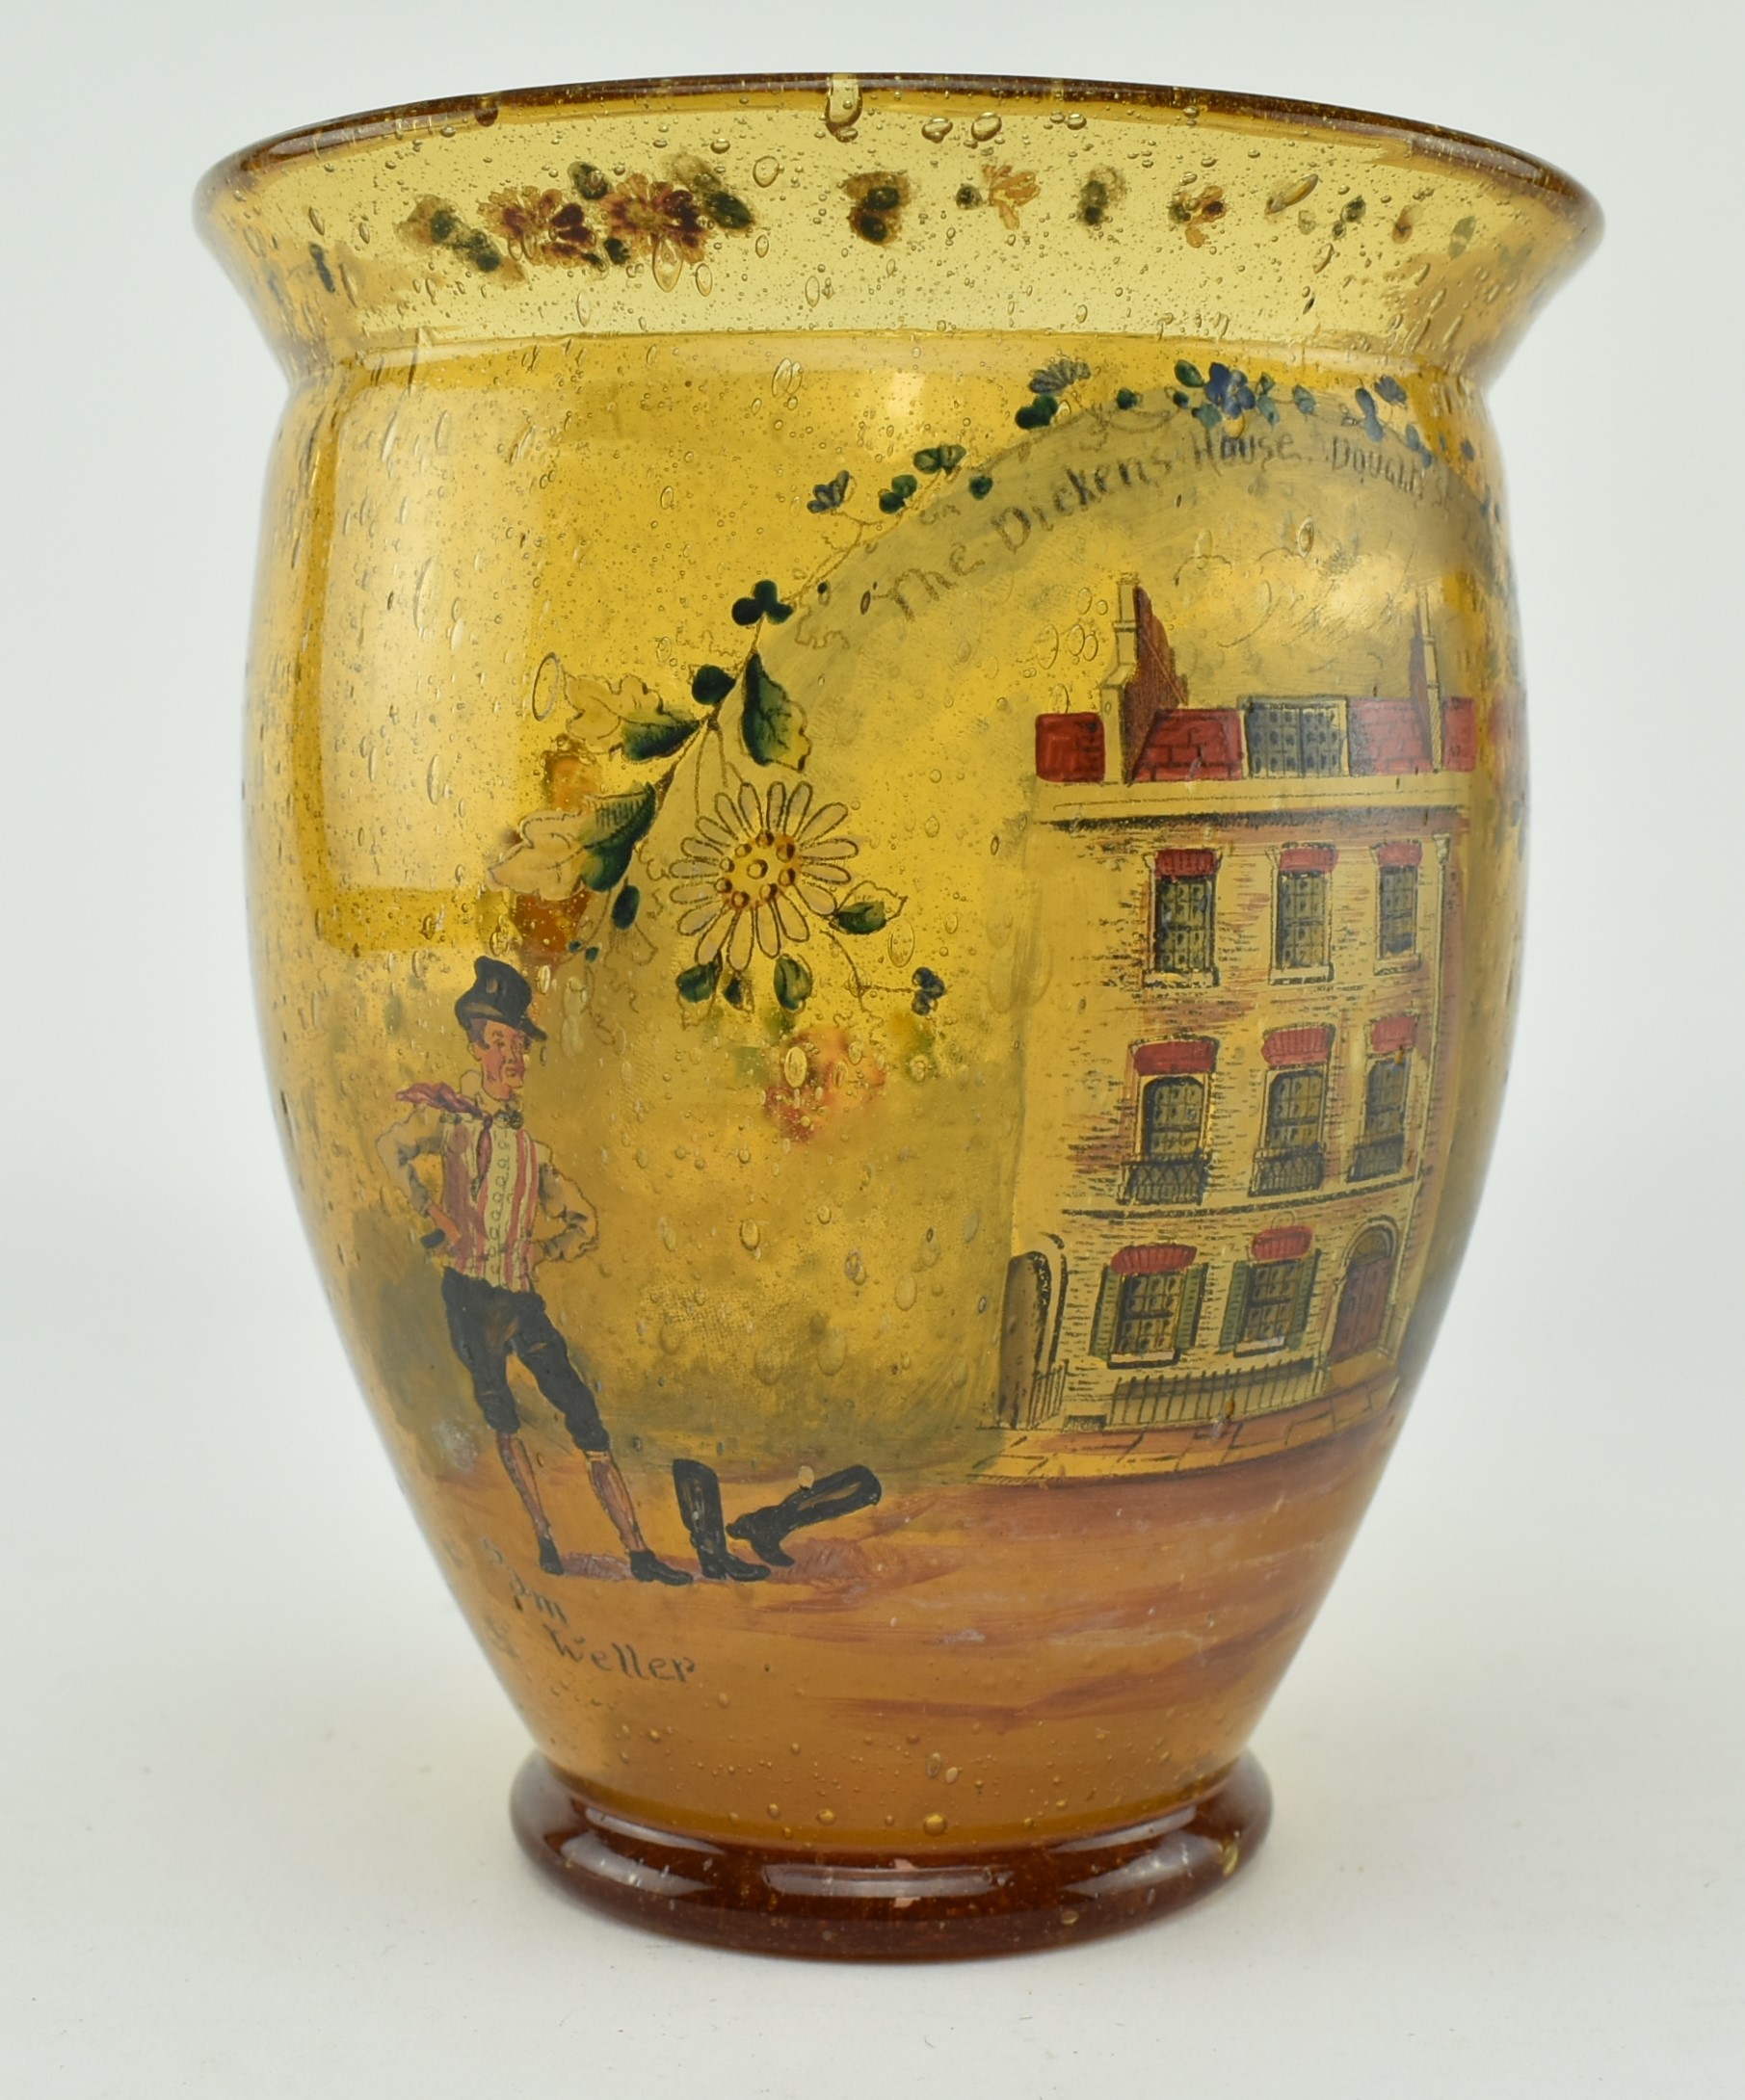 LATE 19TH CENTURY AMBER GLASS VASE WITH DICKENS SCENES - Image 2 of 5